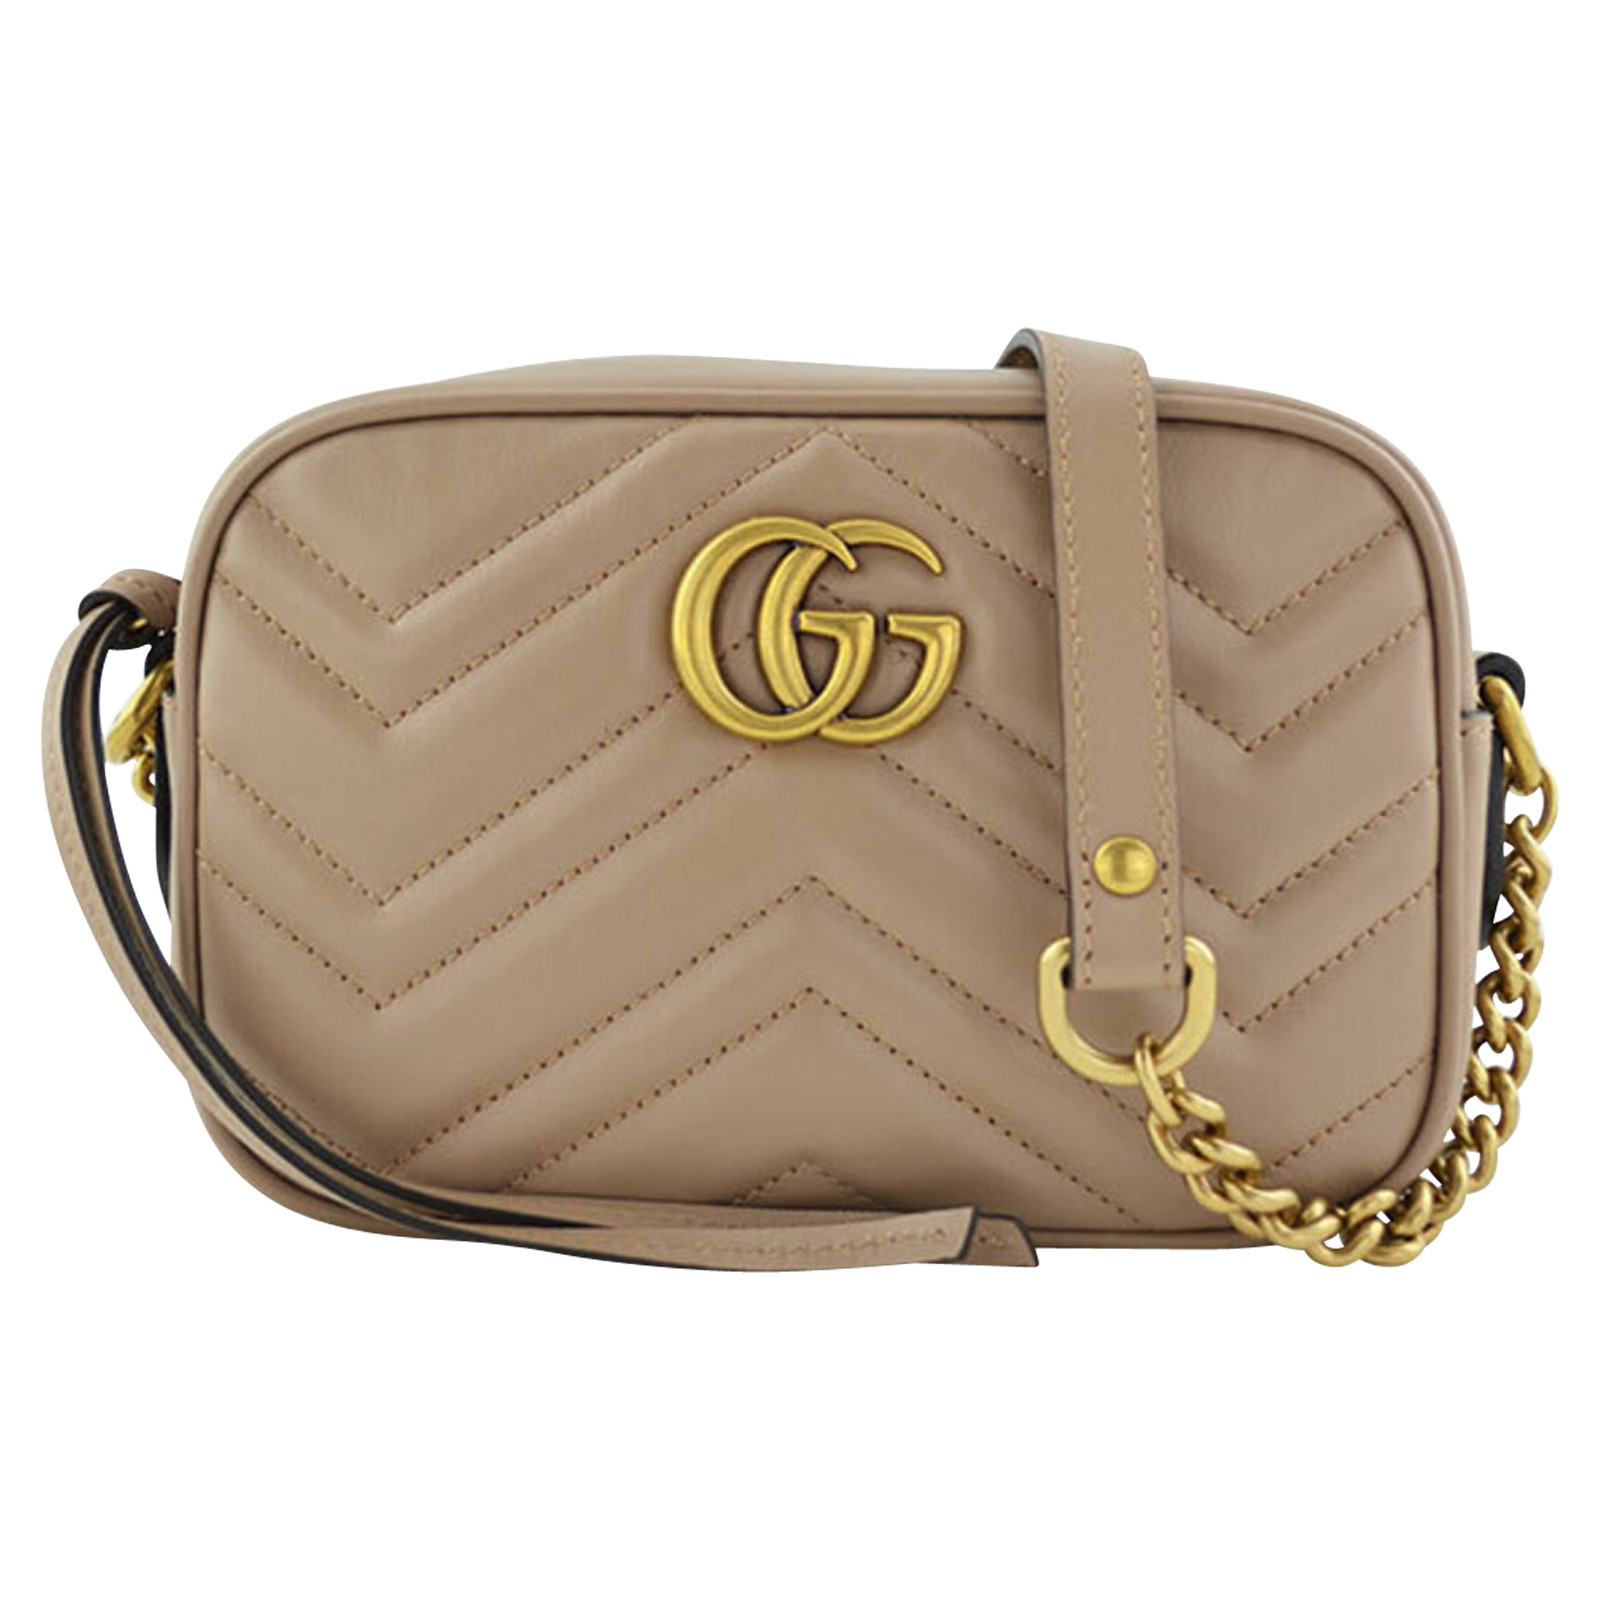 GUCCI Women's Marmont Camera Bag aus Leder in Nude